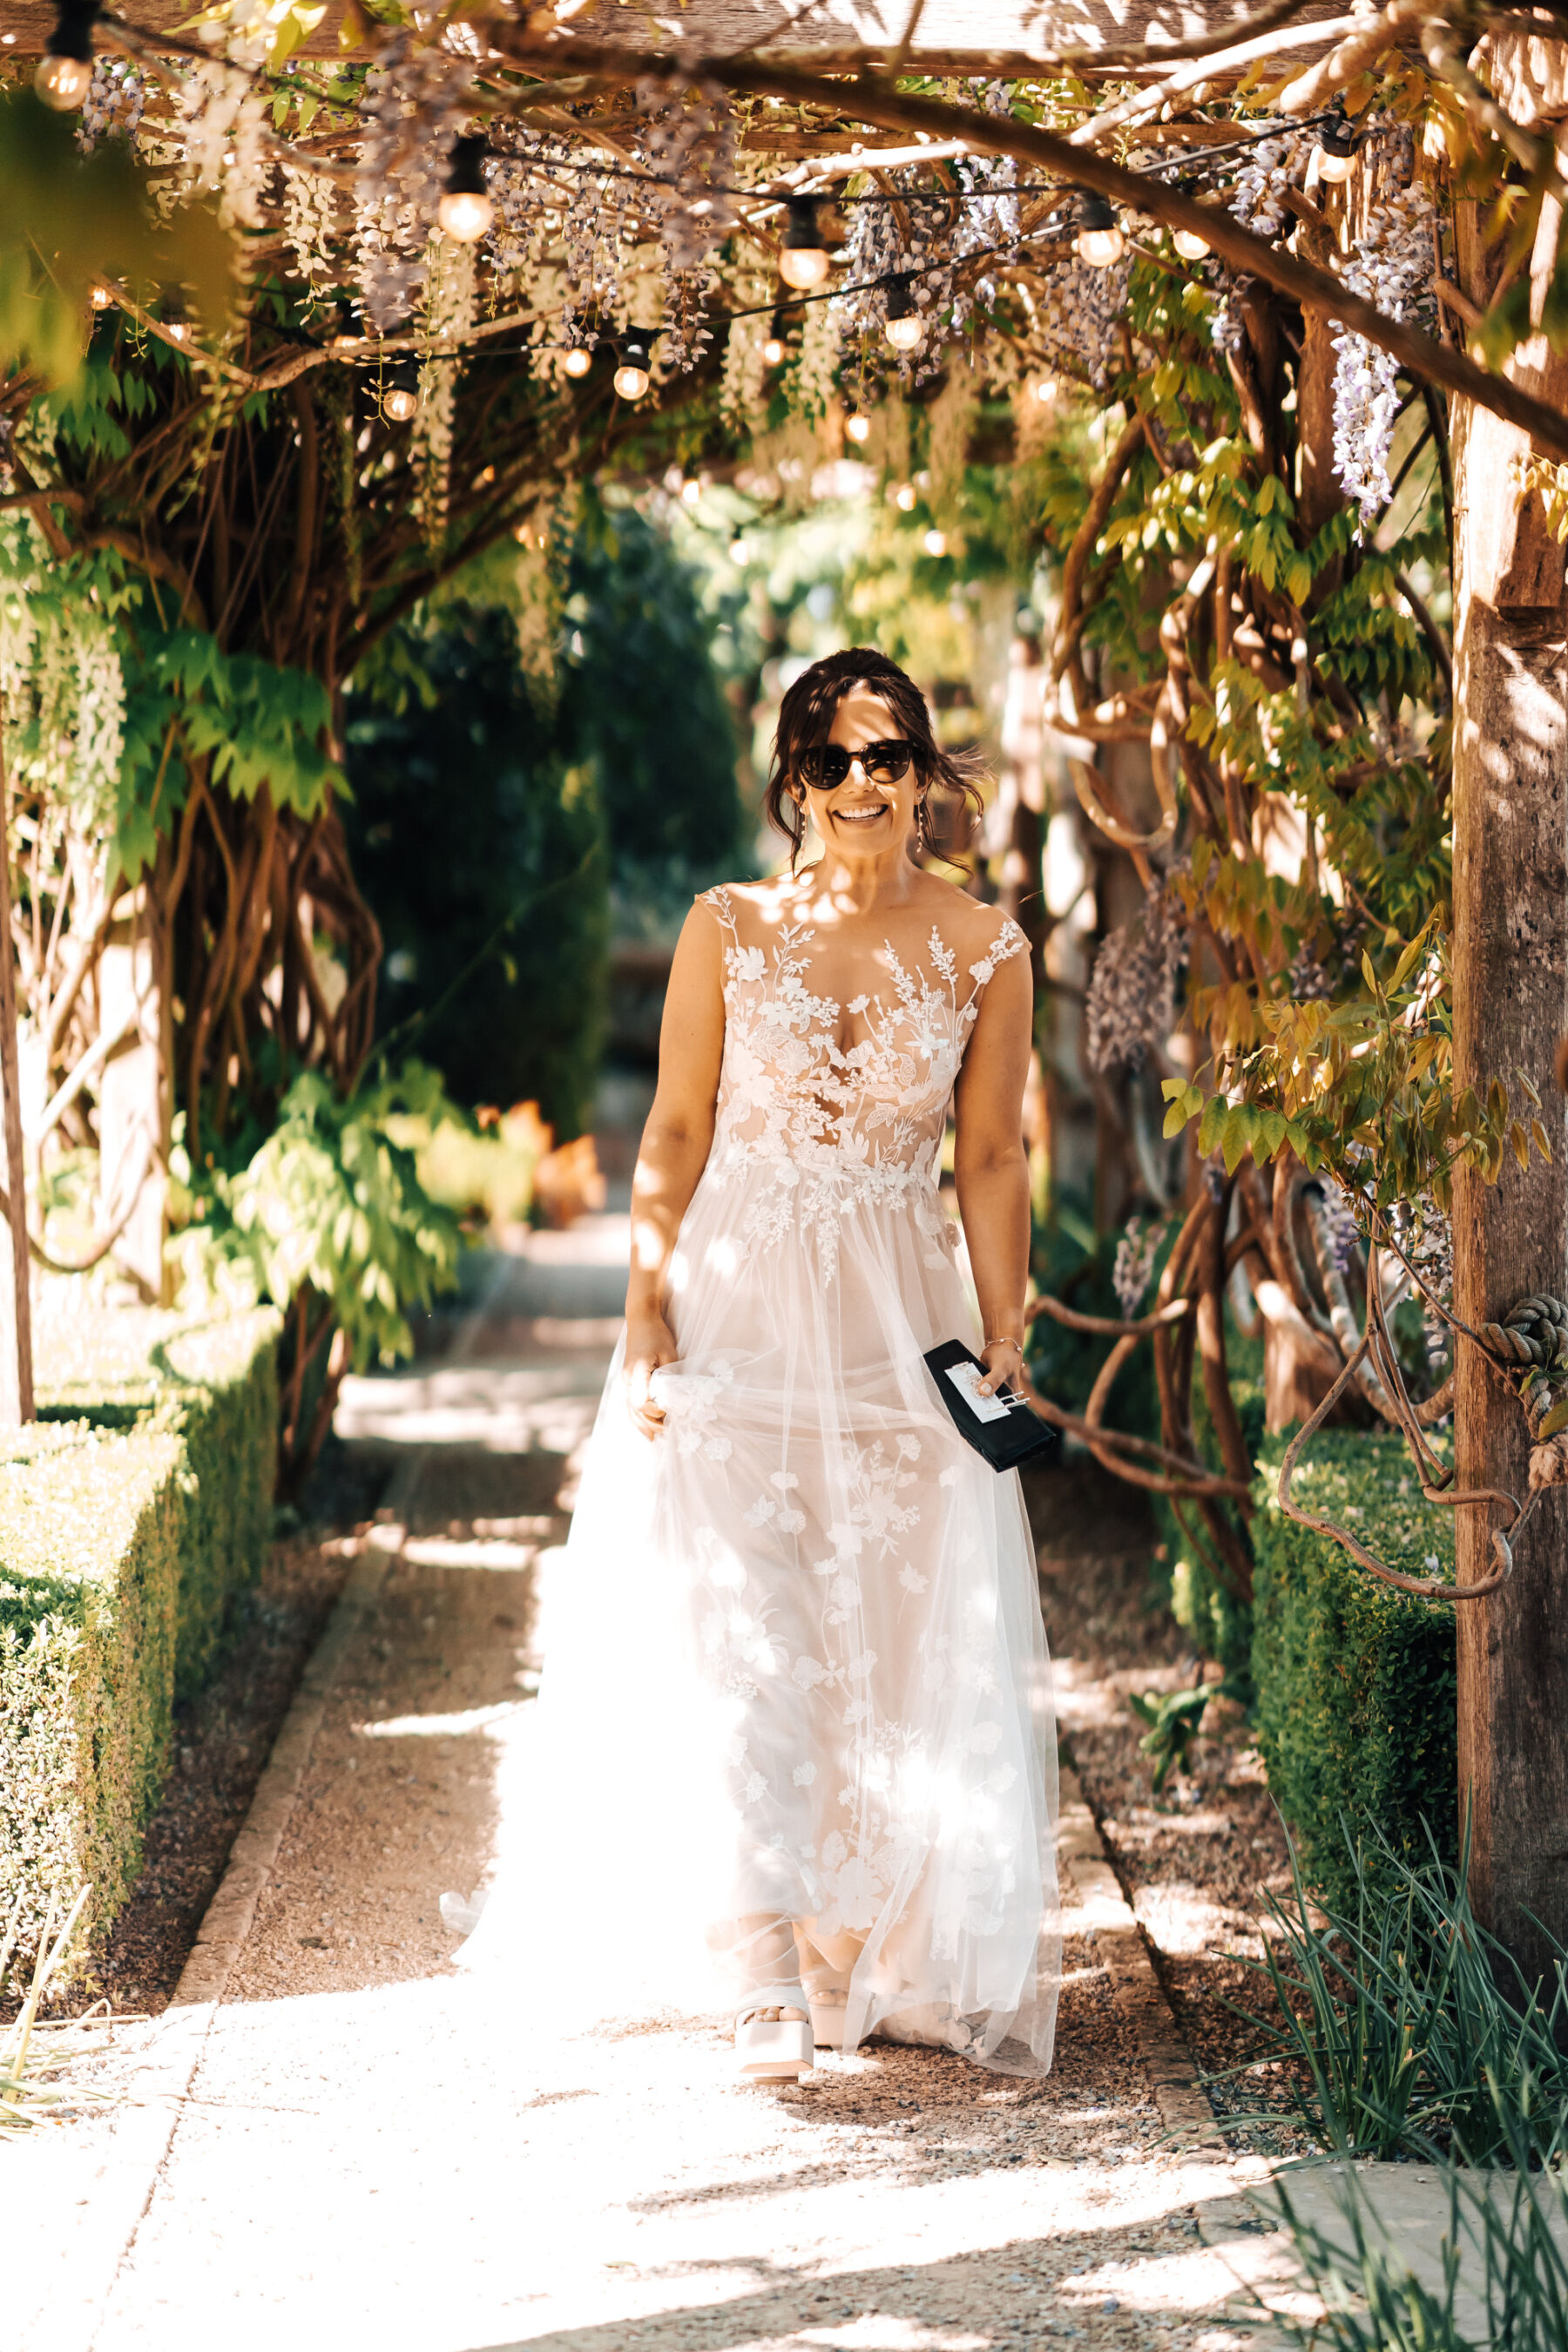 Bride in an Anna Kara dress and sunglasses walking beneath the wisteria, at Tythe Barn wedding venue in the Cotswolds.